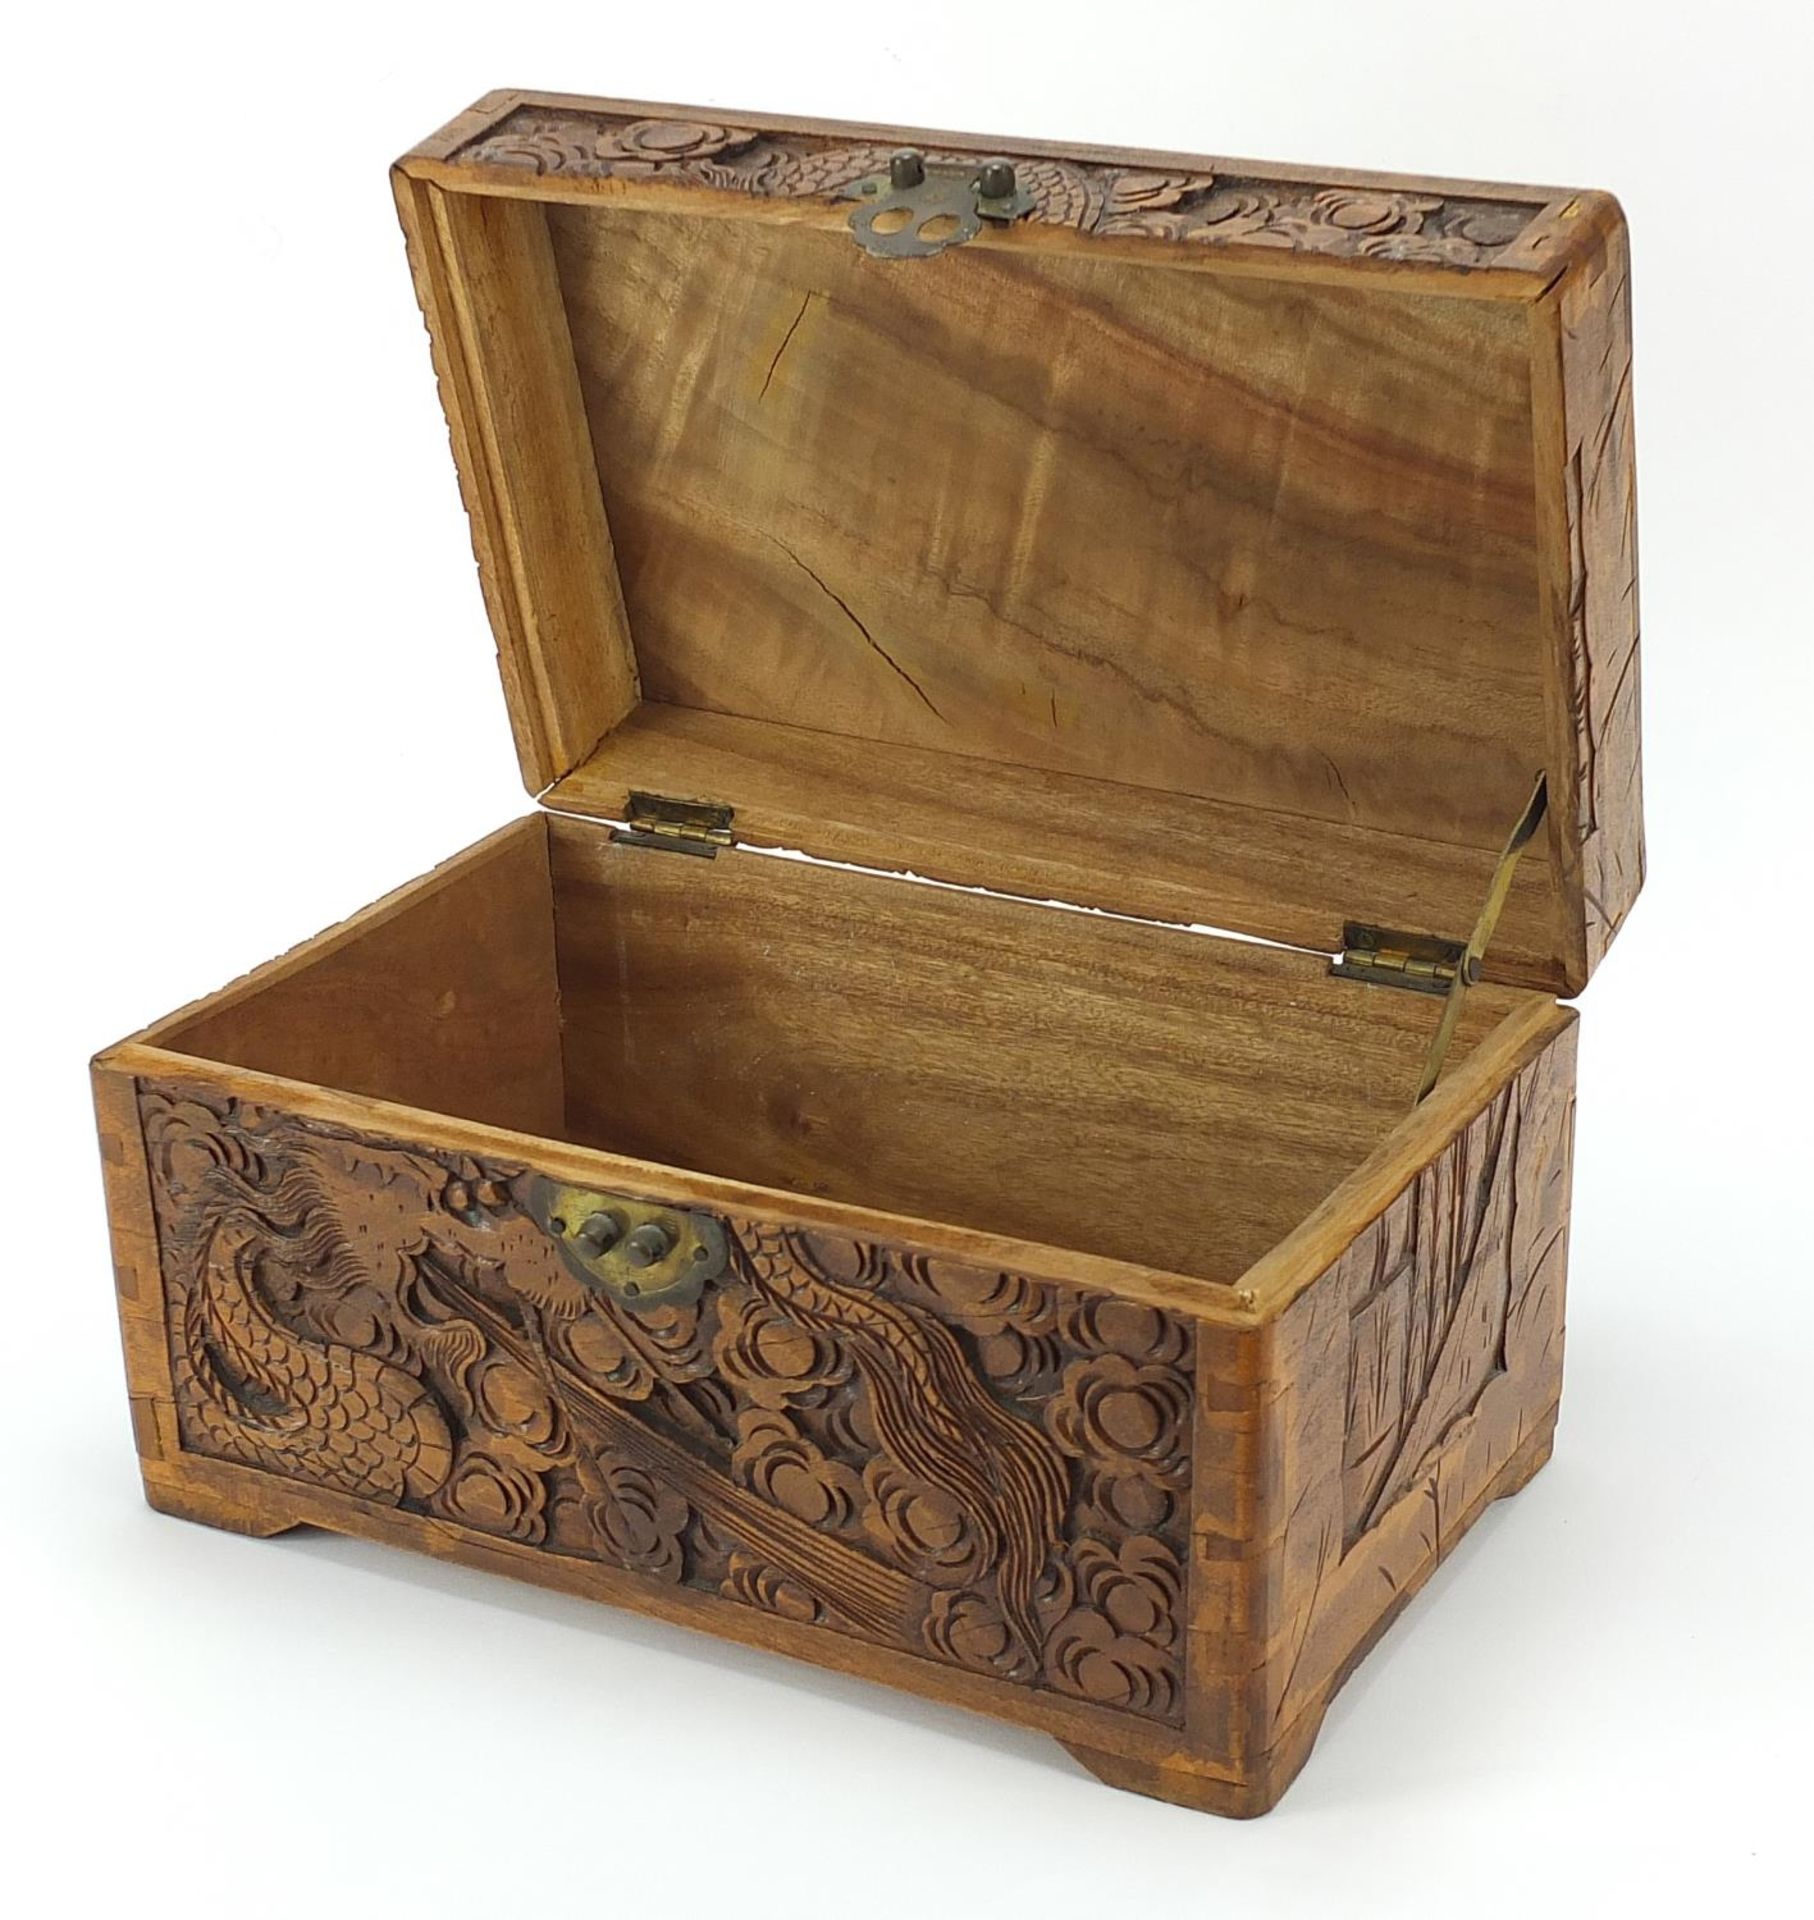 Chinese camphor wood table top chest carved with dragons amongst clouds, 17cm H x 30cm W x 19cm D - Image 2 of 4